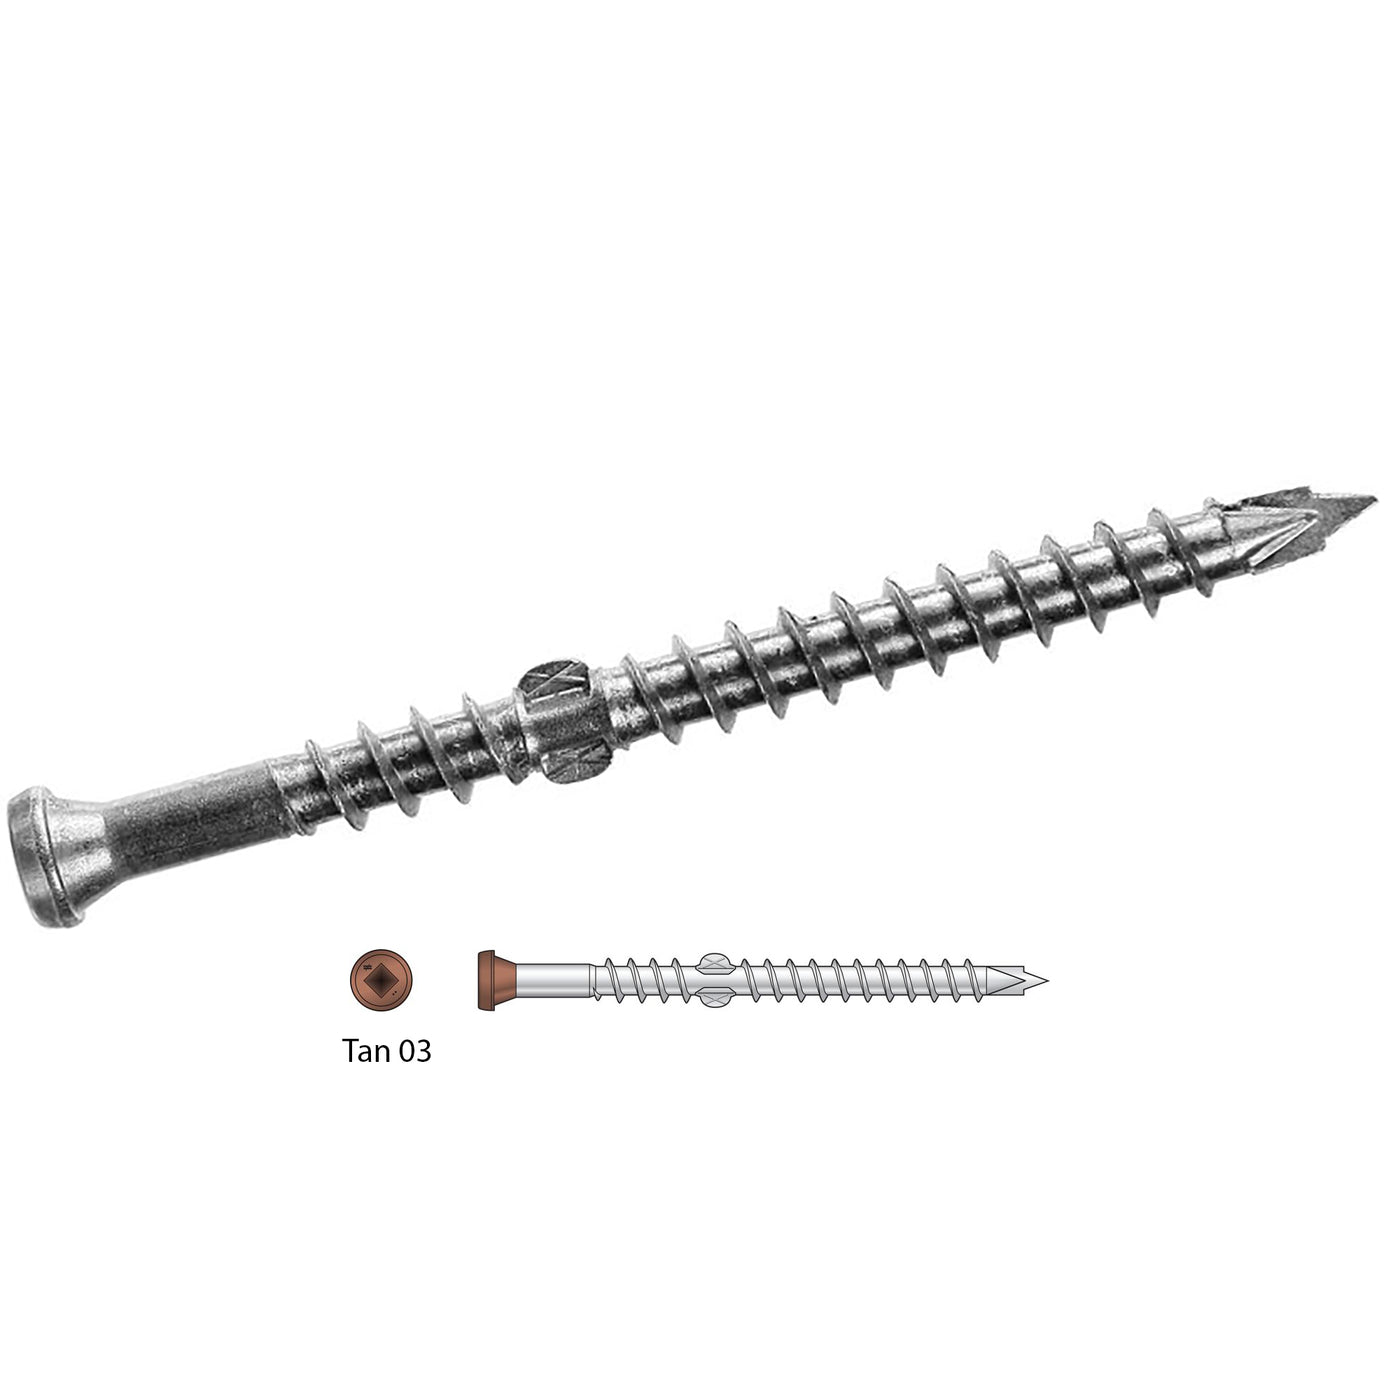 #10 x 2 1/2 Simpson Strong-Tie Square Head Deck-Drive™ DHPD HARDWOOD Screw 305 Stainless Steel (#2 Square) Collated - Tan 03 Box (100)